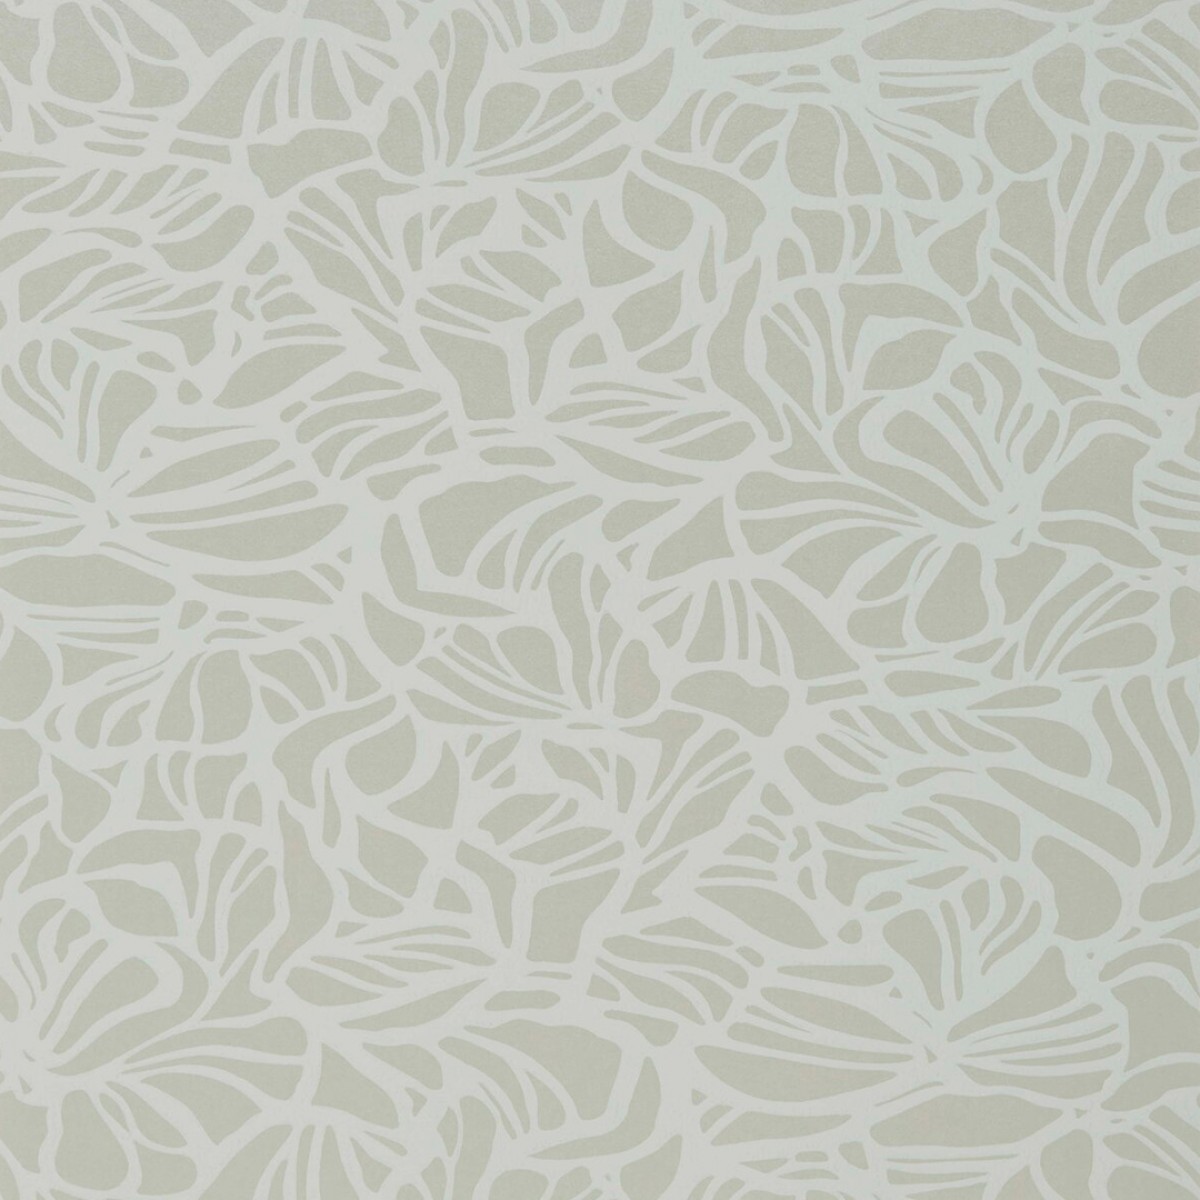 Tapet Purity, Porcelain Cream Luxury Patterned, 1838 Wallcoverings, 5.3mp / rola, Tapet living 